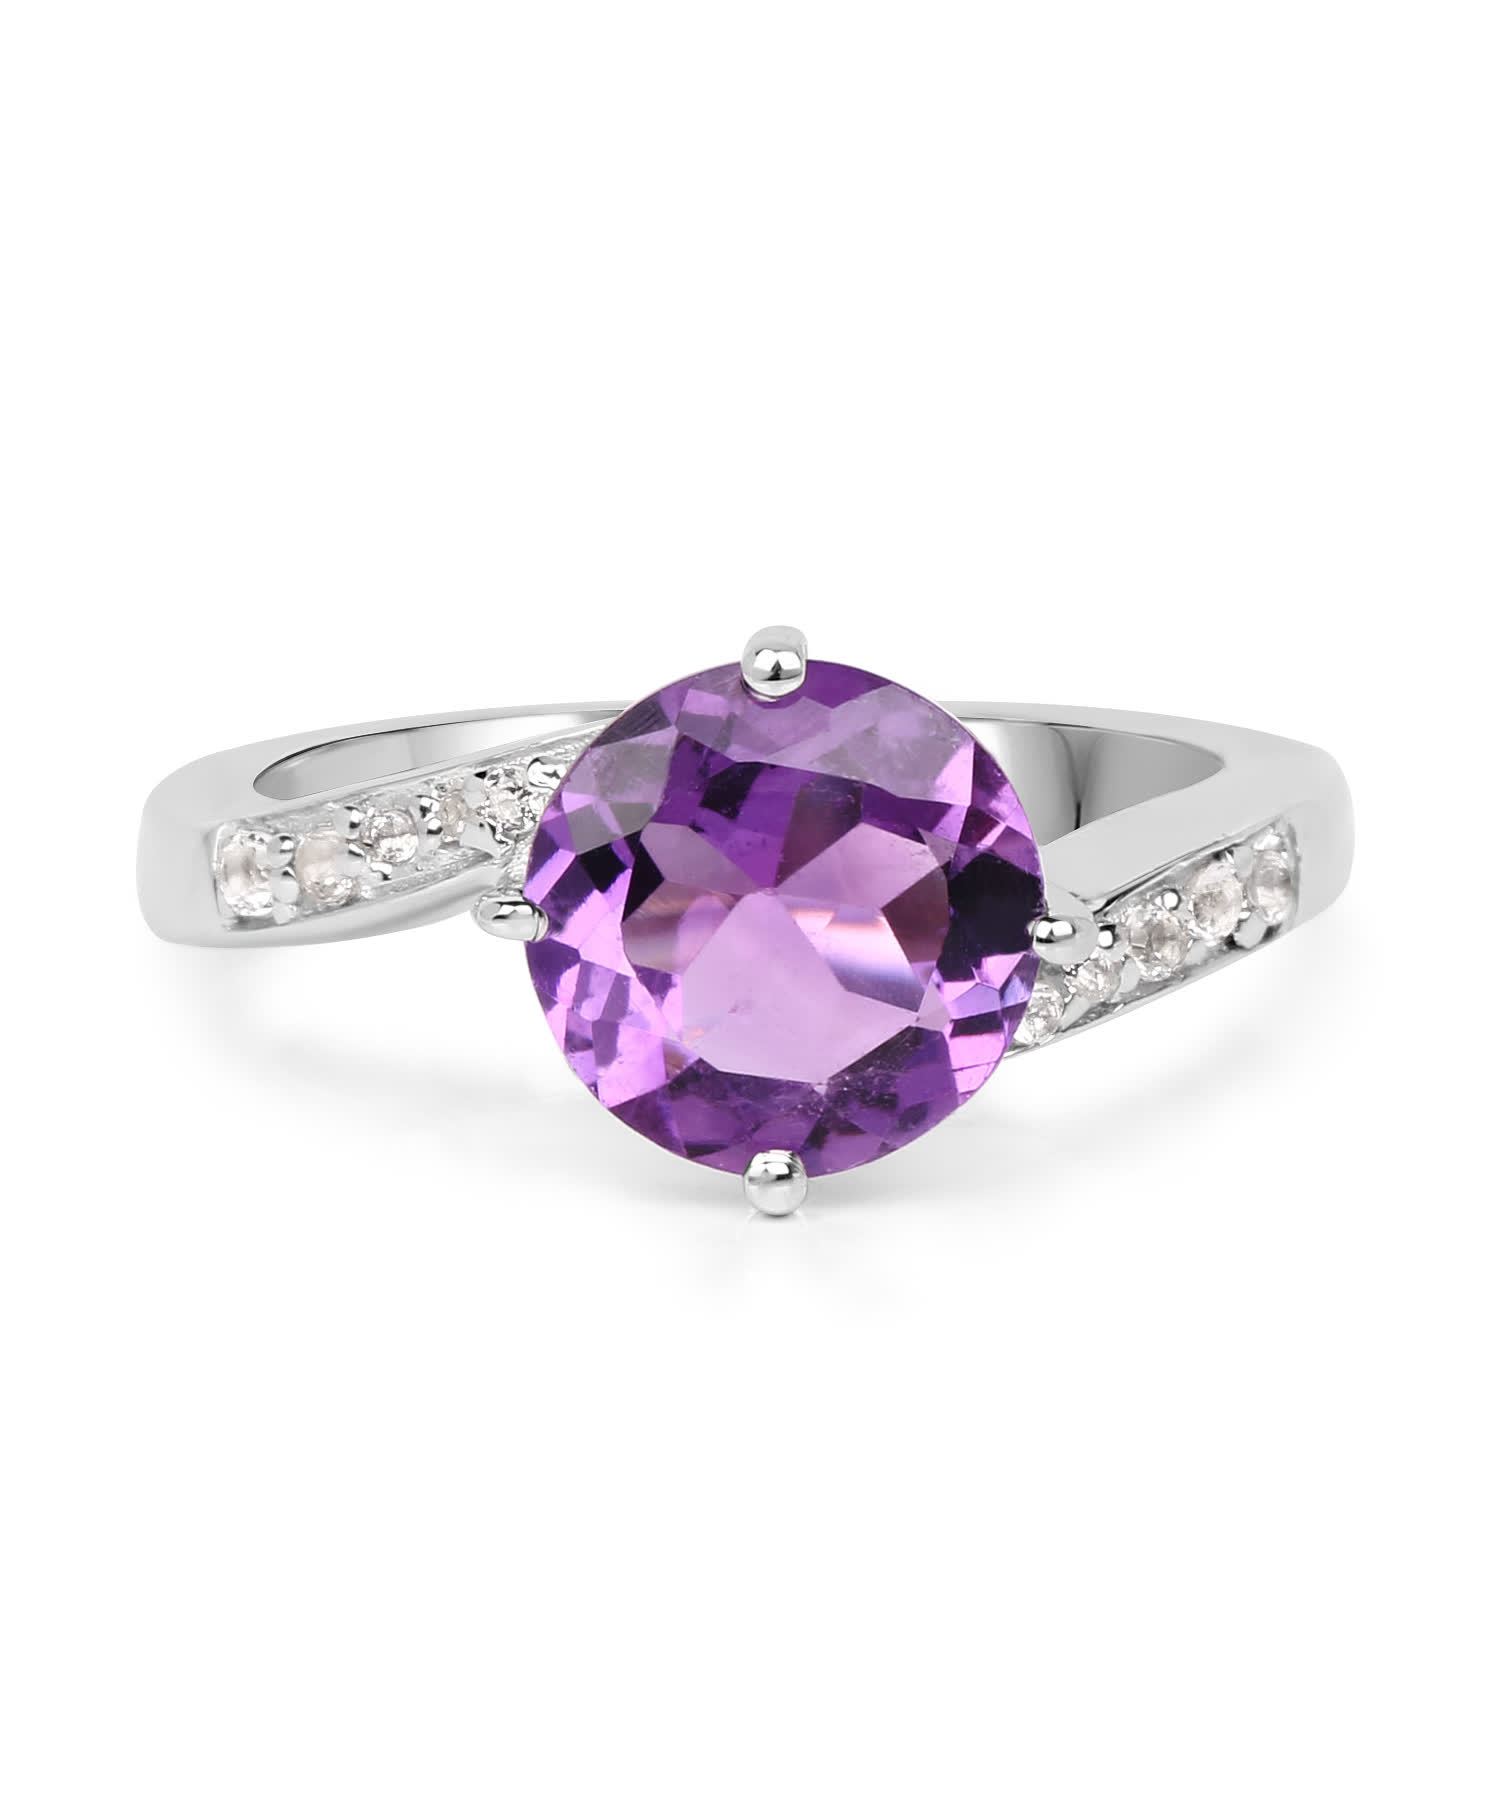 2.55ctw Natural Amethyst and Topaz Rhodium Plated 925 Sterling Silver Ring View 3